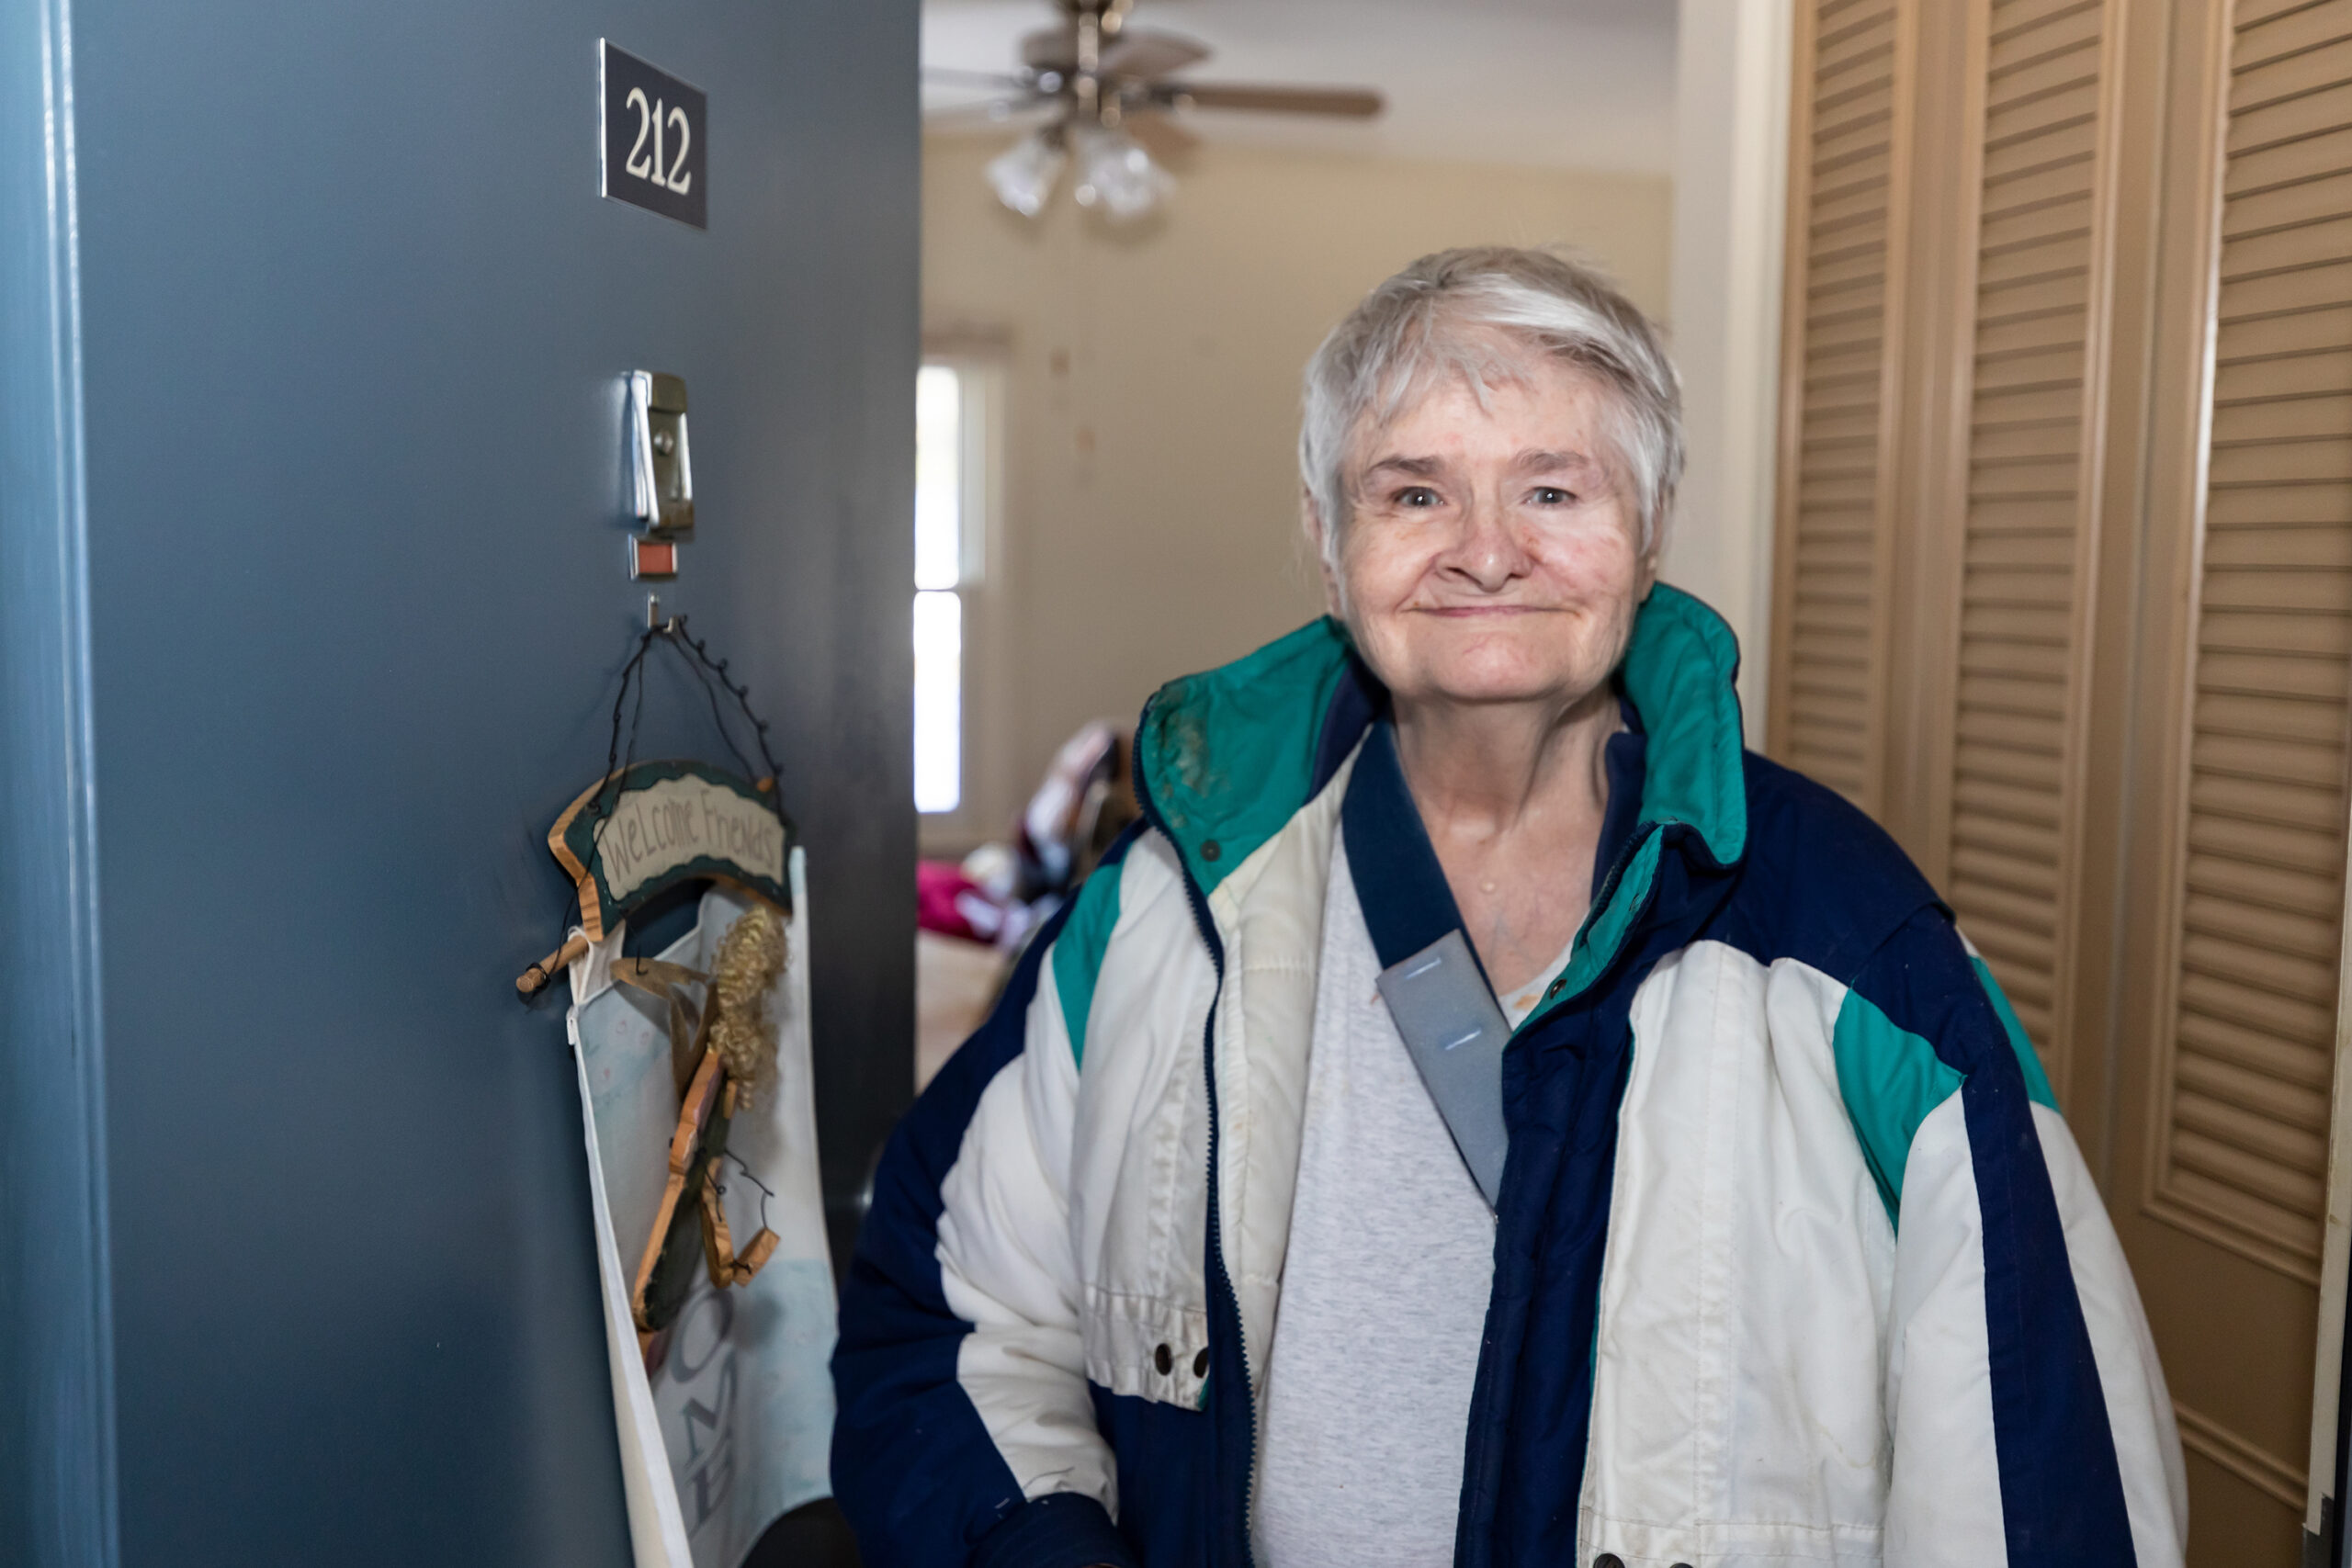 Maryann Preble stands just inside the open door of her apartment wearing a coat and smiling.